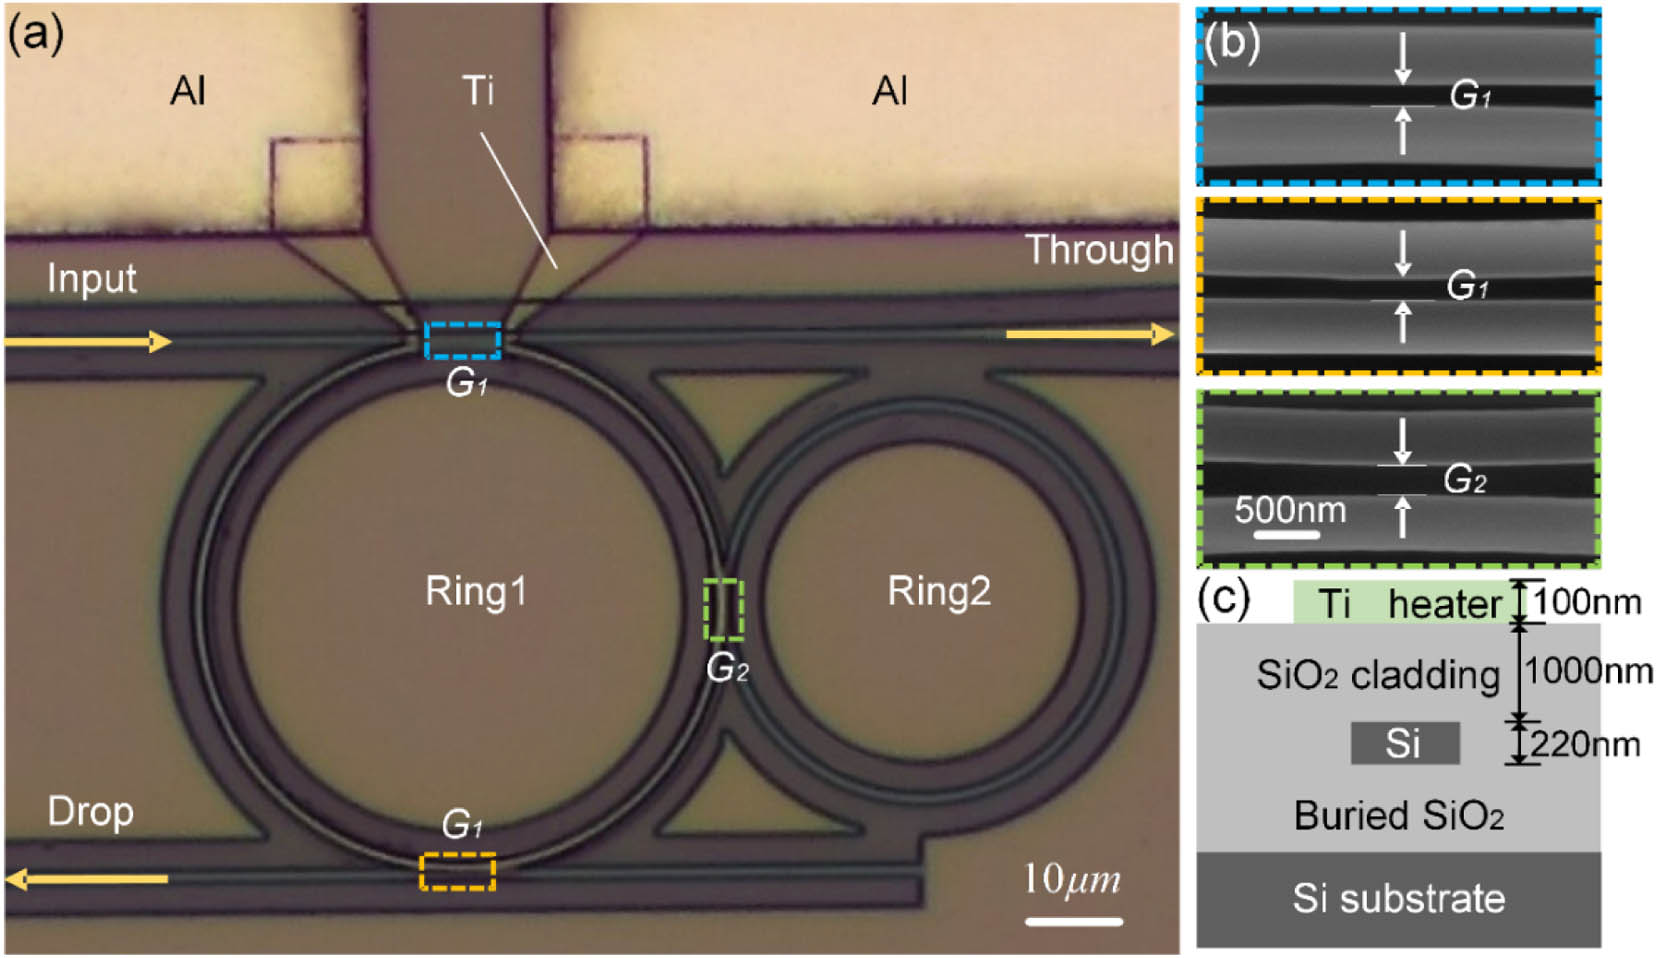 (a) Microscope image of the fabricated Q-factor controllable system. (b) Scanning electron microscopy images of different coupling regions before the SiO2 layer was deposited. (c) Schematic of waveguide cross section in Ring 1 with a Ti heater on the top.